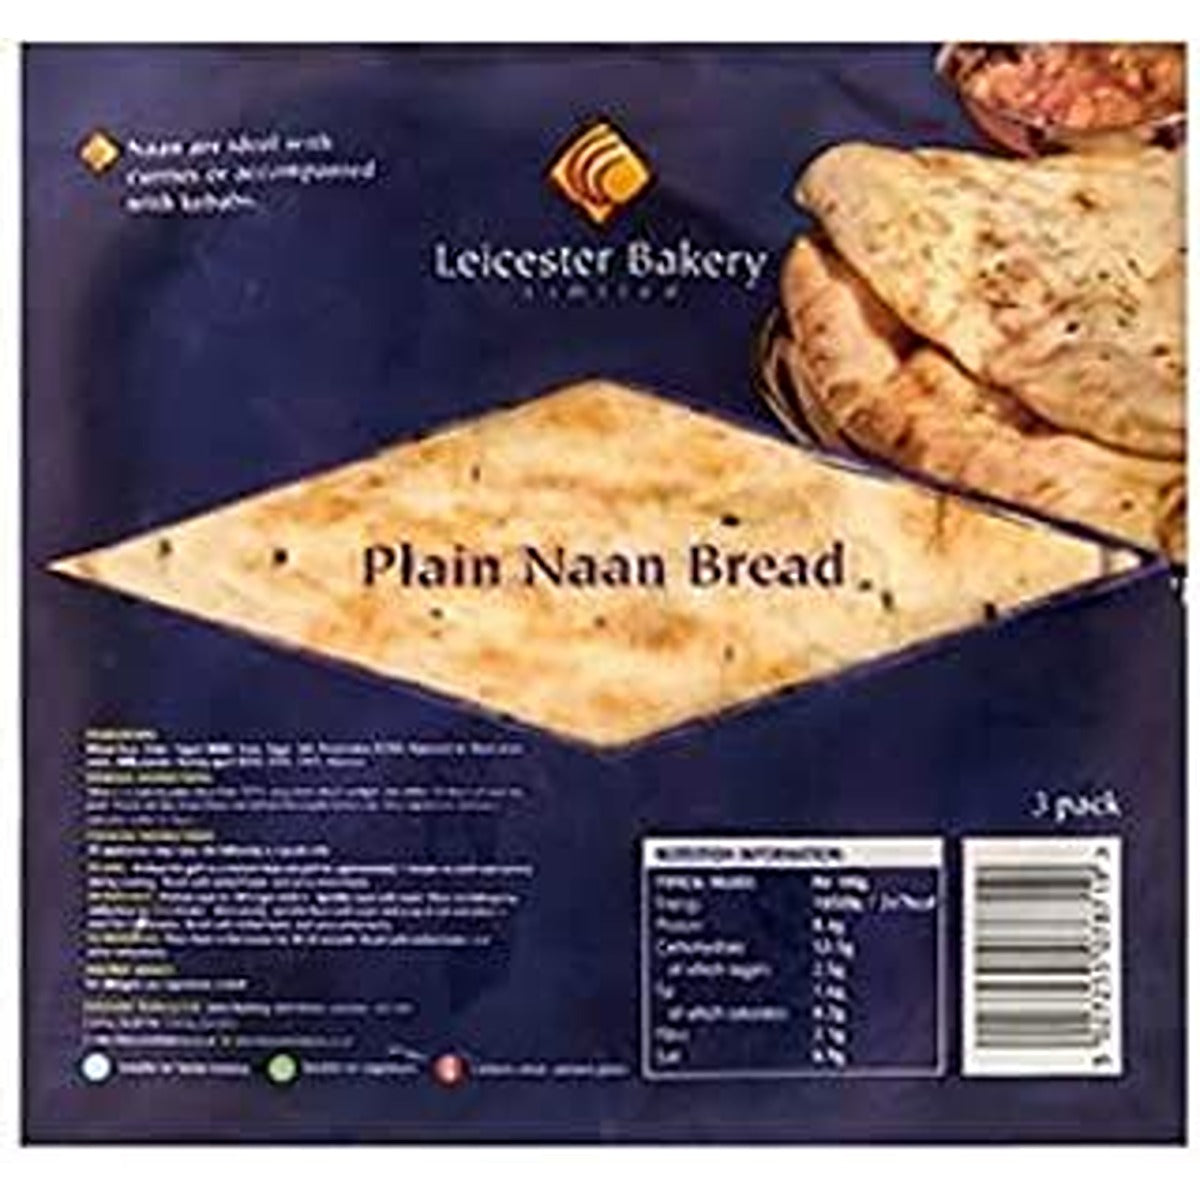 Leicester Bakery - Plain Naan Bread - 4 Pack - Continental Food Store